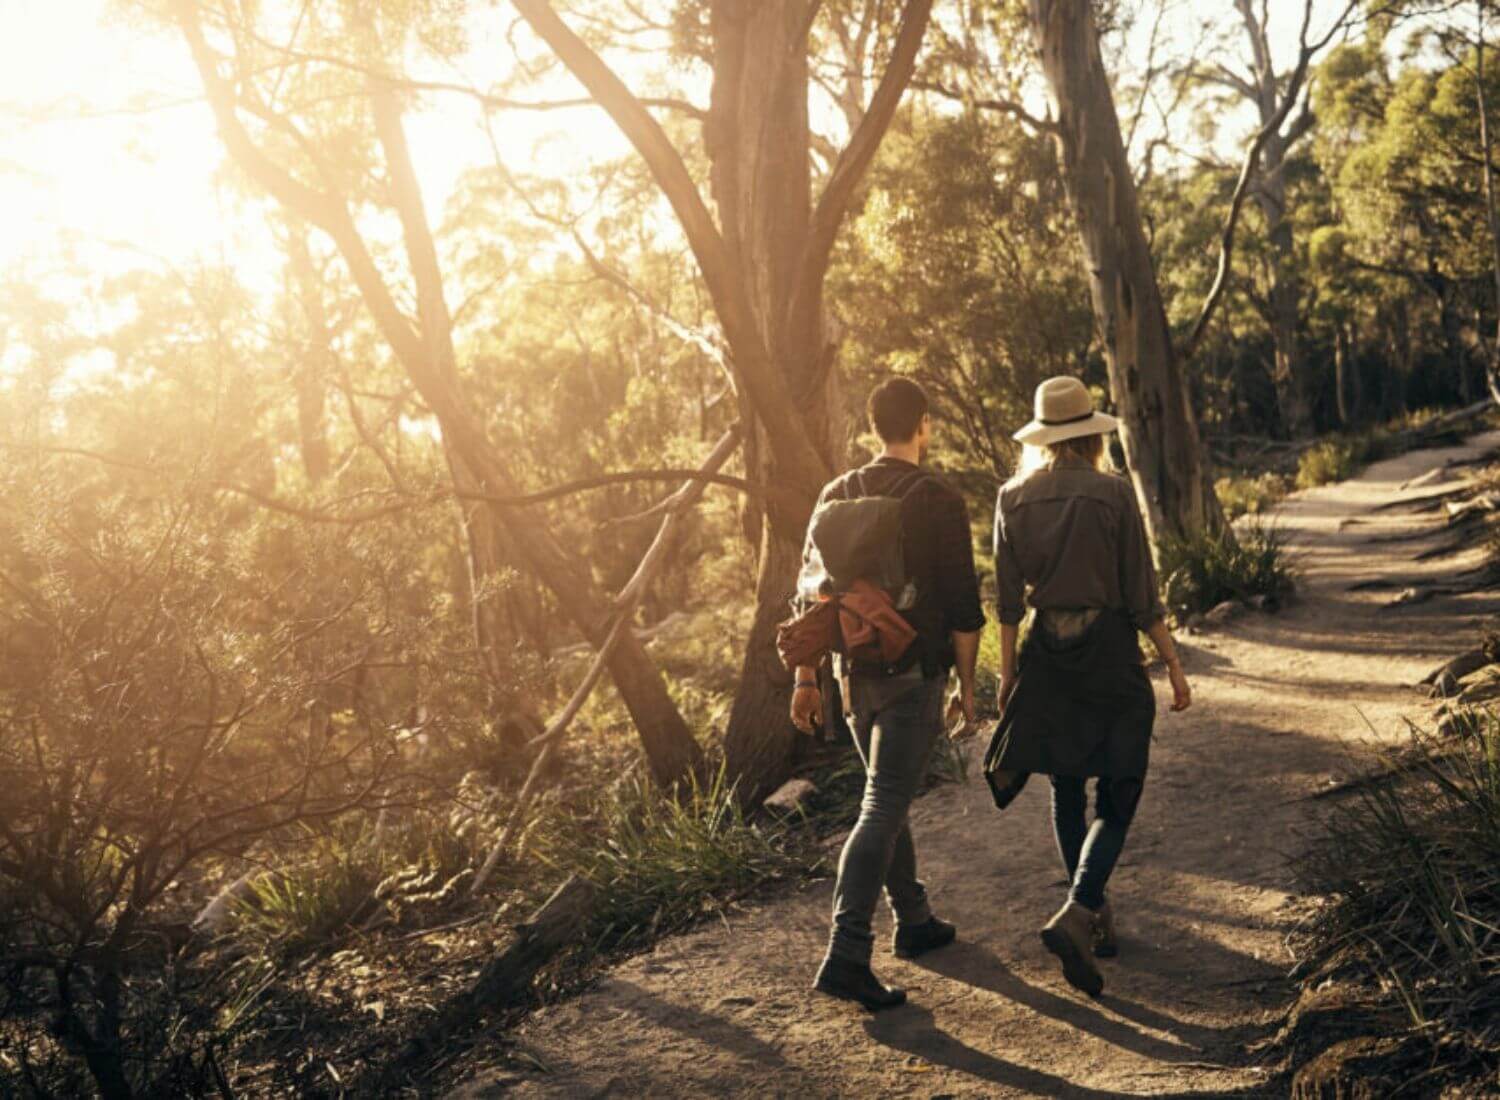 7 Incredible Benefits Of Walking That Promote A Healthy Life